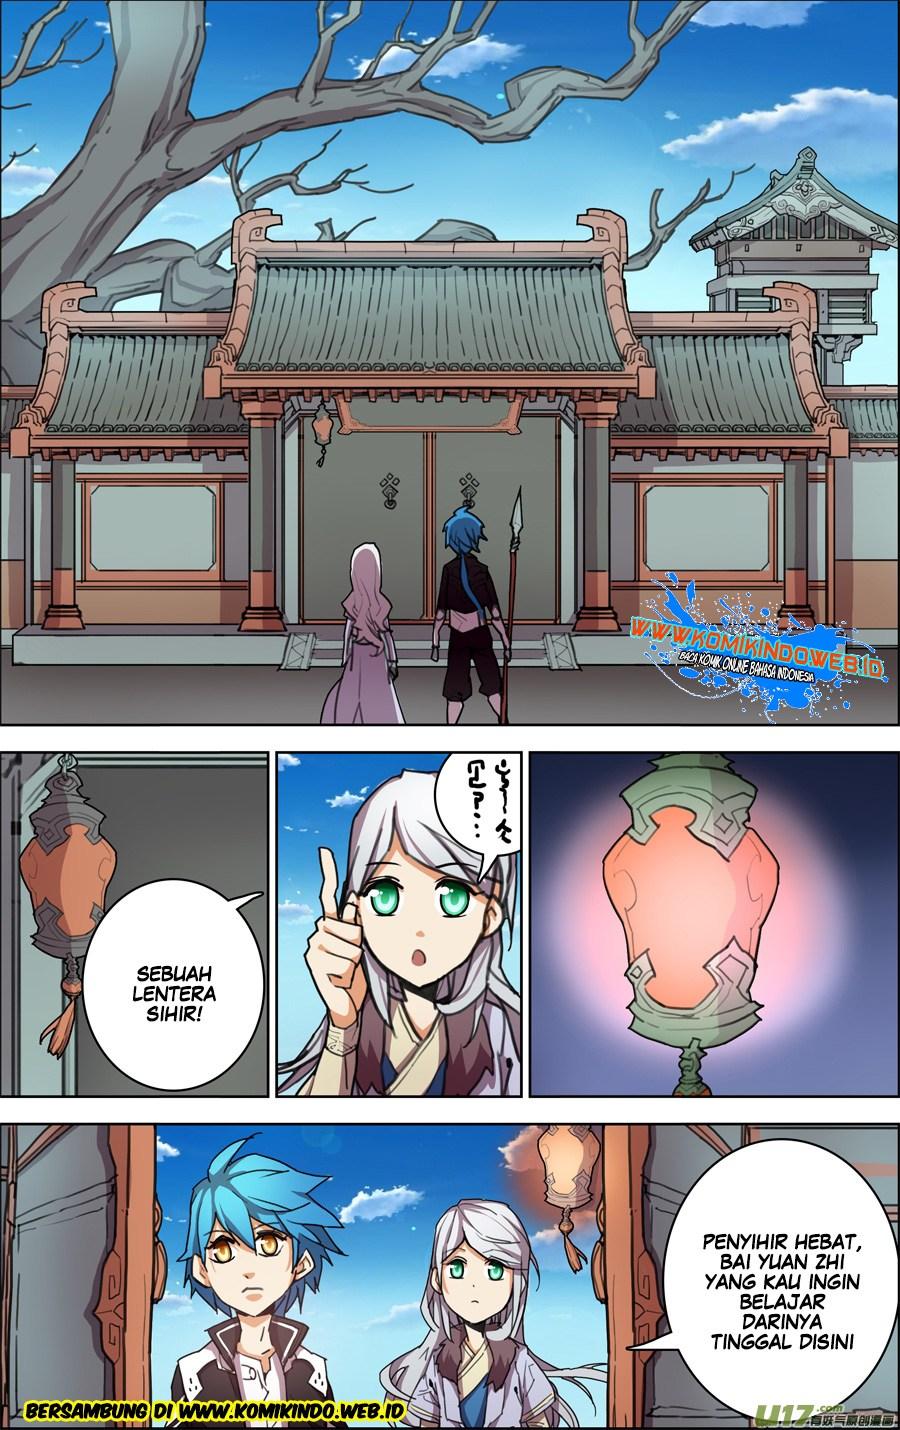 Lord Xue Ying Chapter 4.3